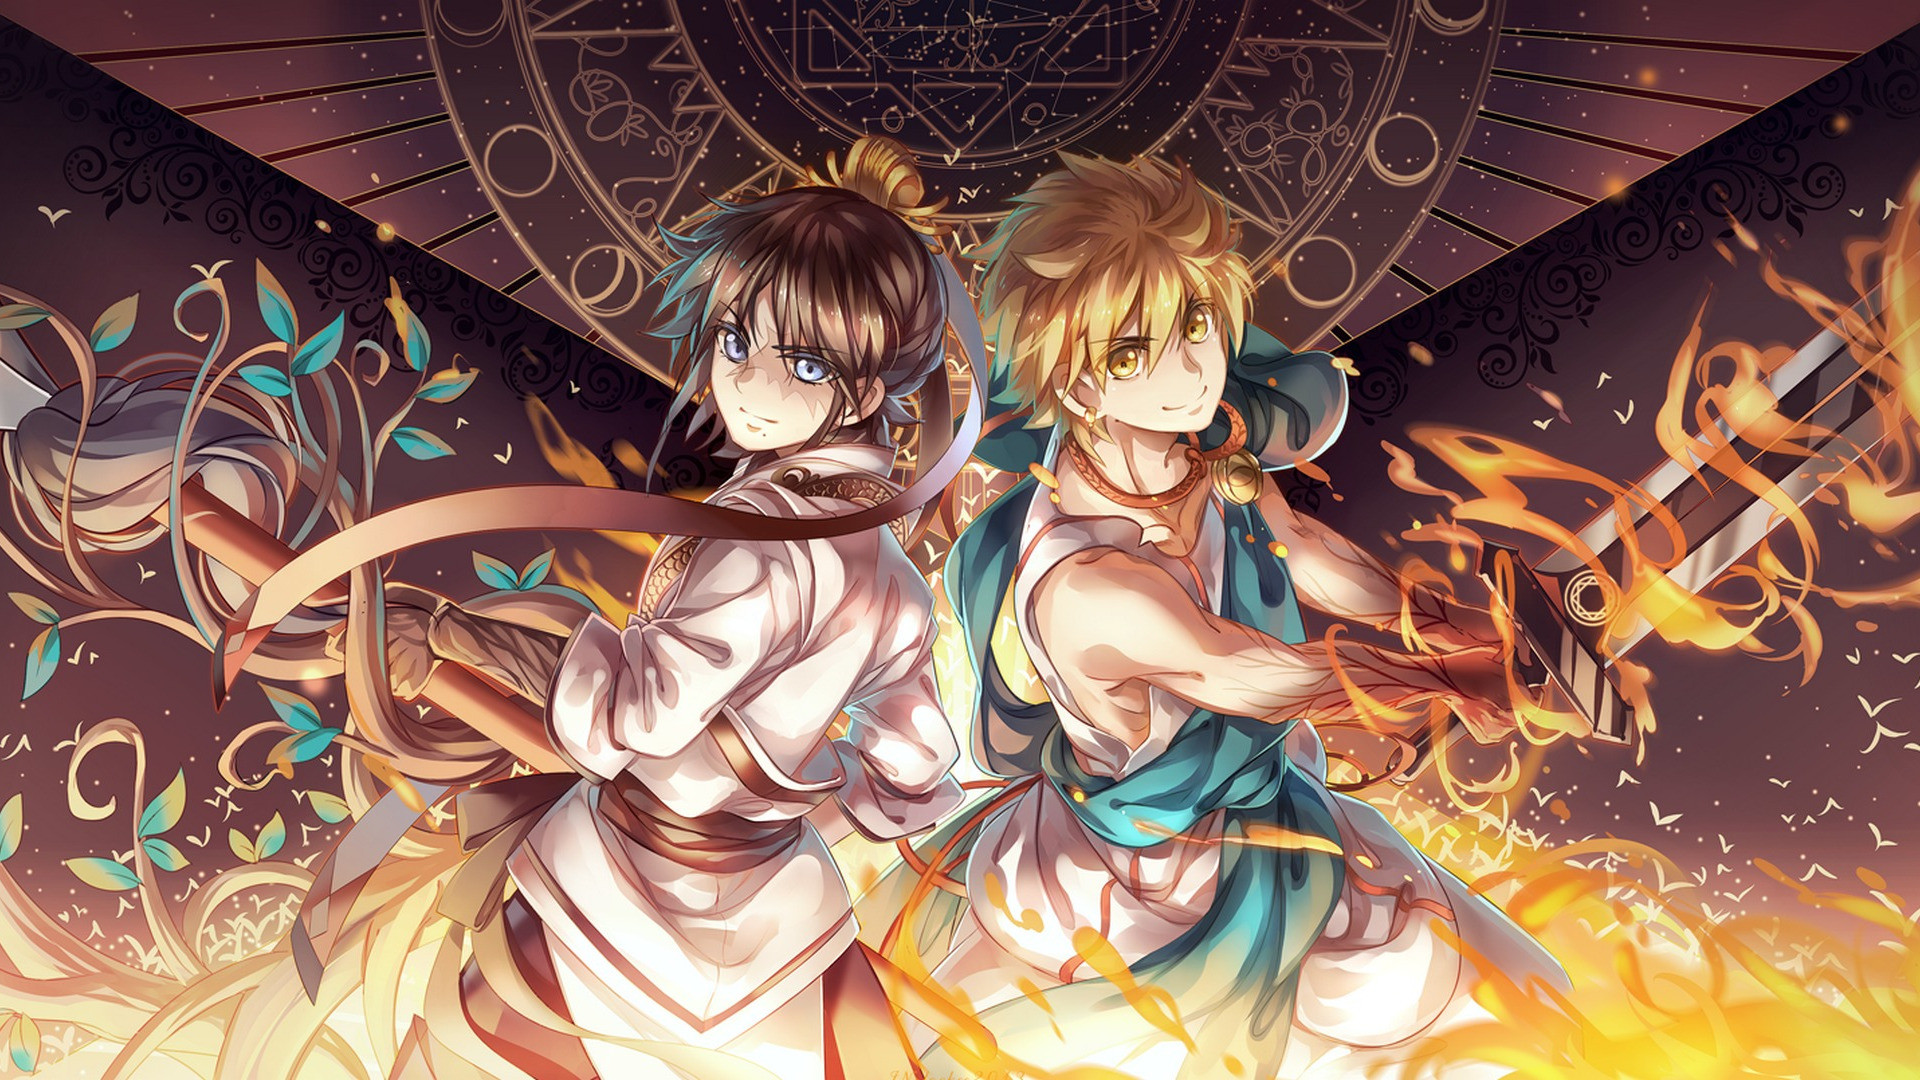 1920x1080 Images of Magi Wallpapers 1366x768 - #SC Anime ...